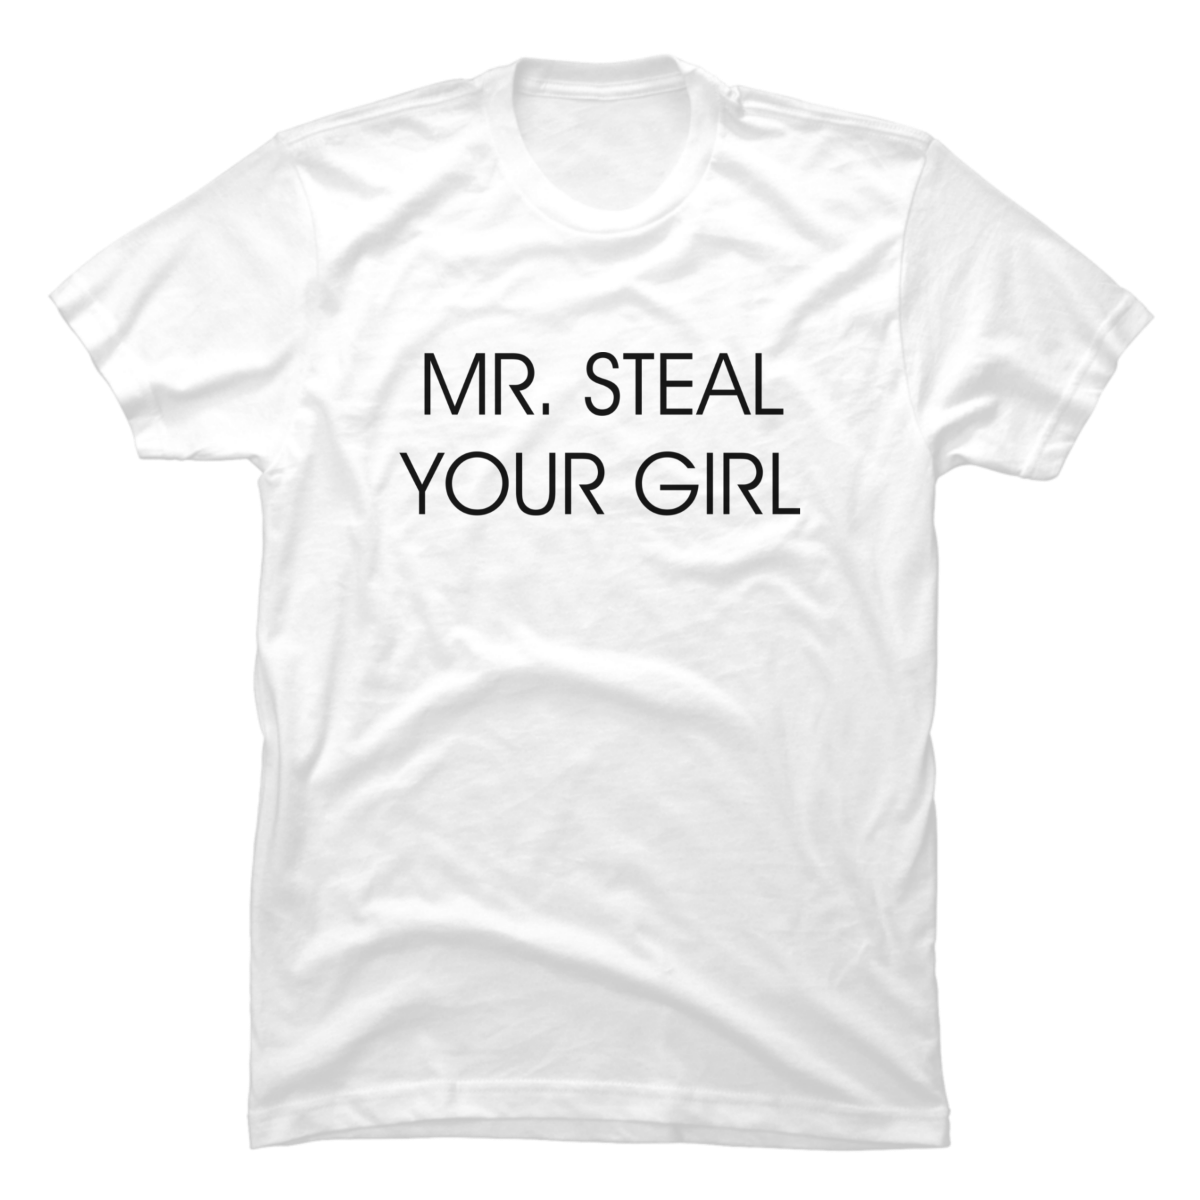 mister steal your girl shirt